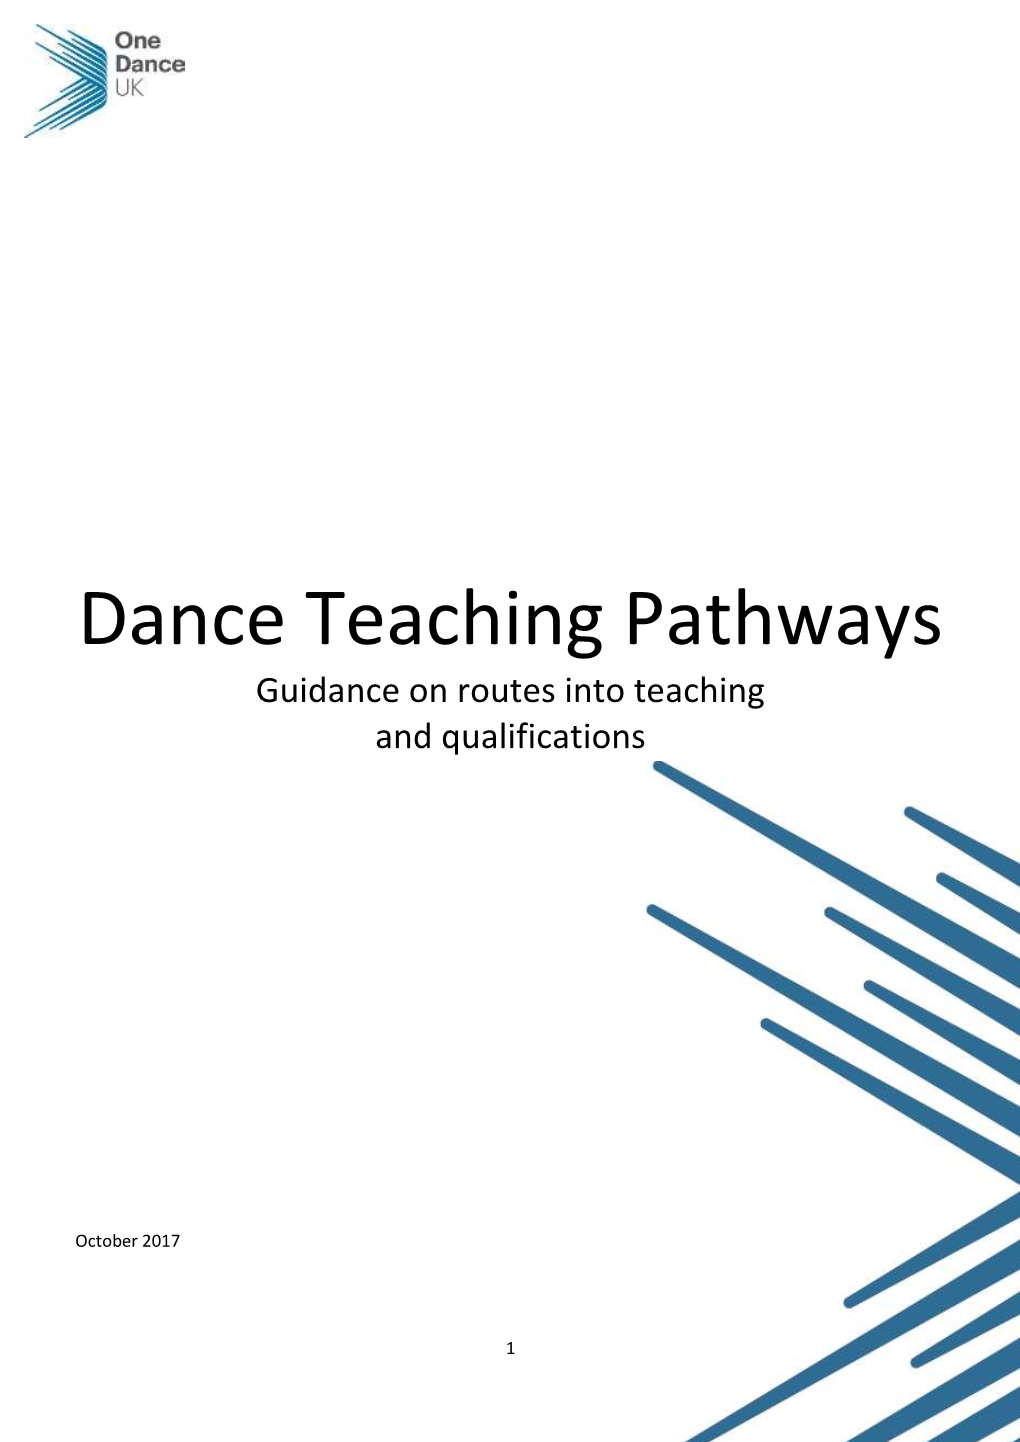 Guidance on Routes Into Teaching and Qualifications